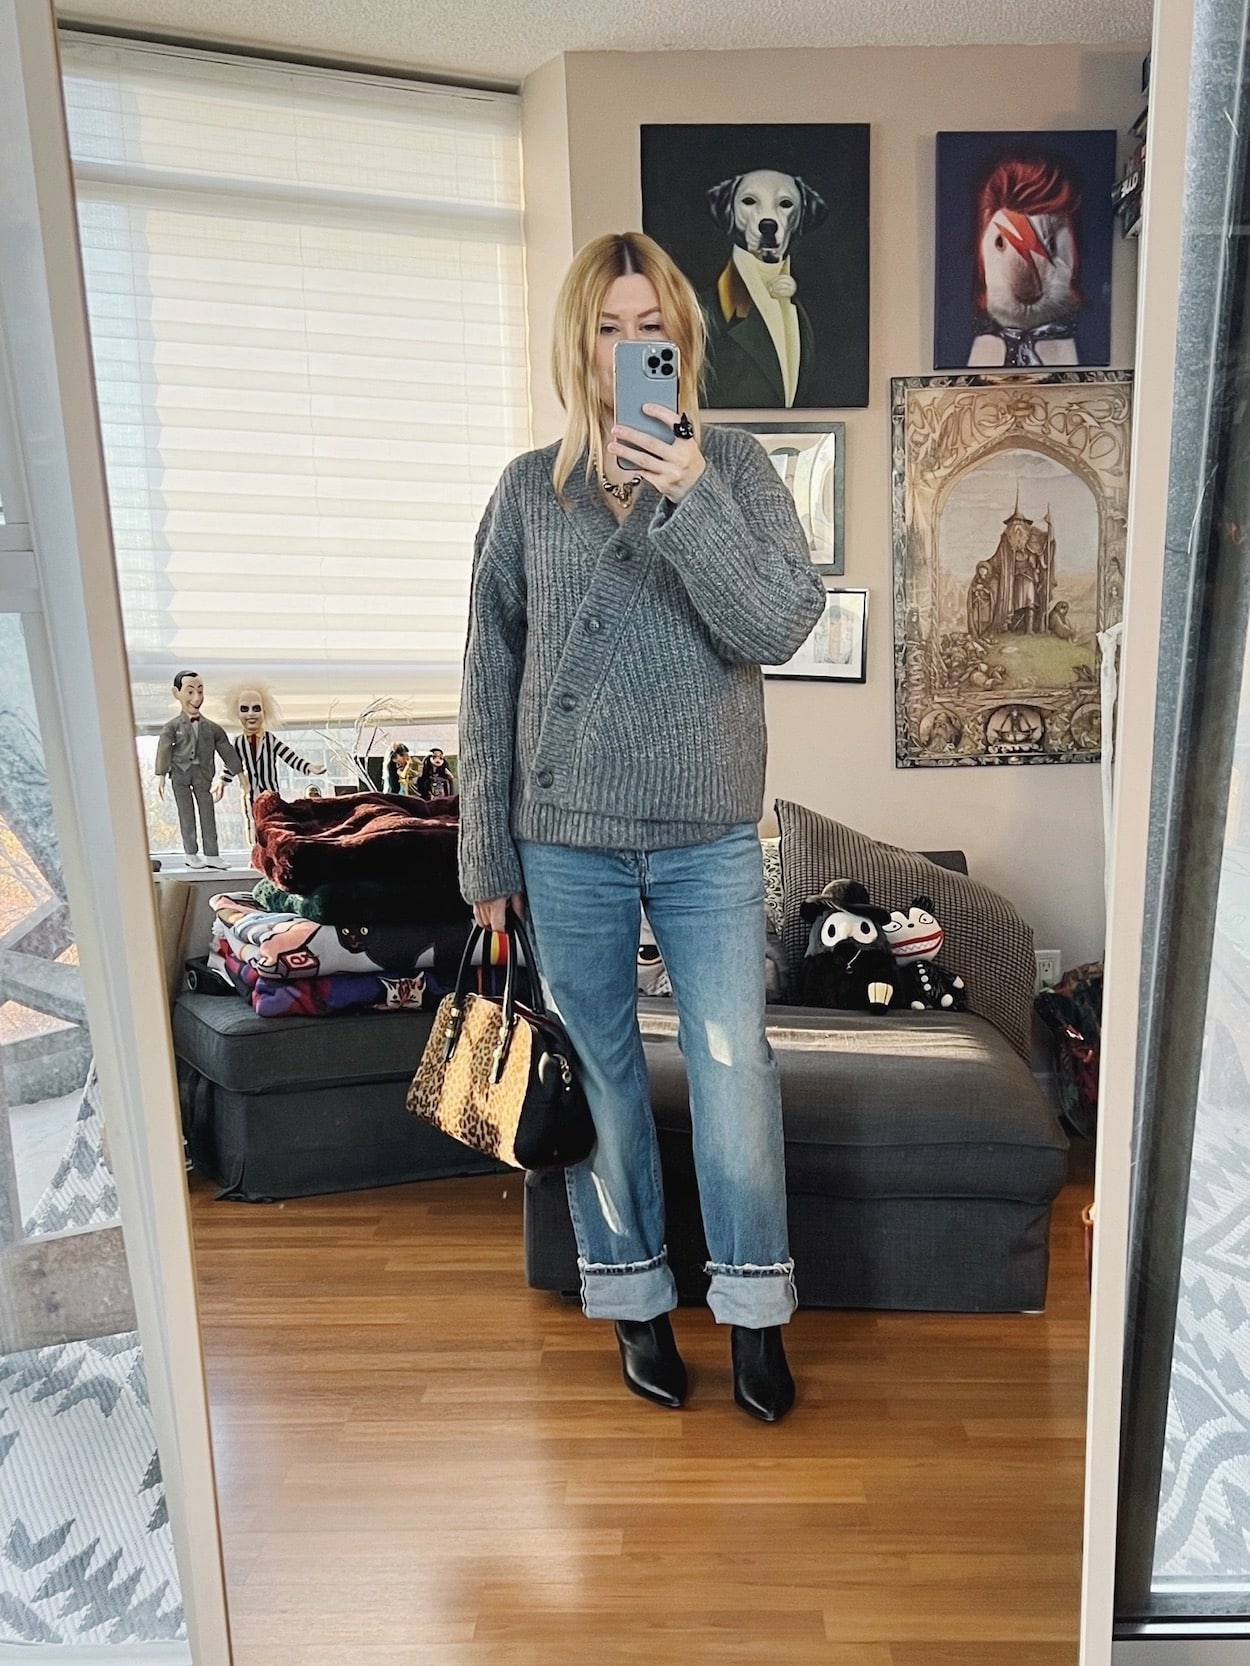 A blonde woman is wearing a grey cardigan sweater, boyfriend jeans, black boots, and is carrying an animal print bag.